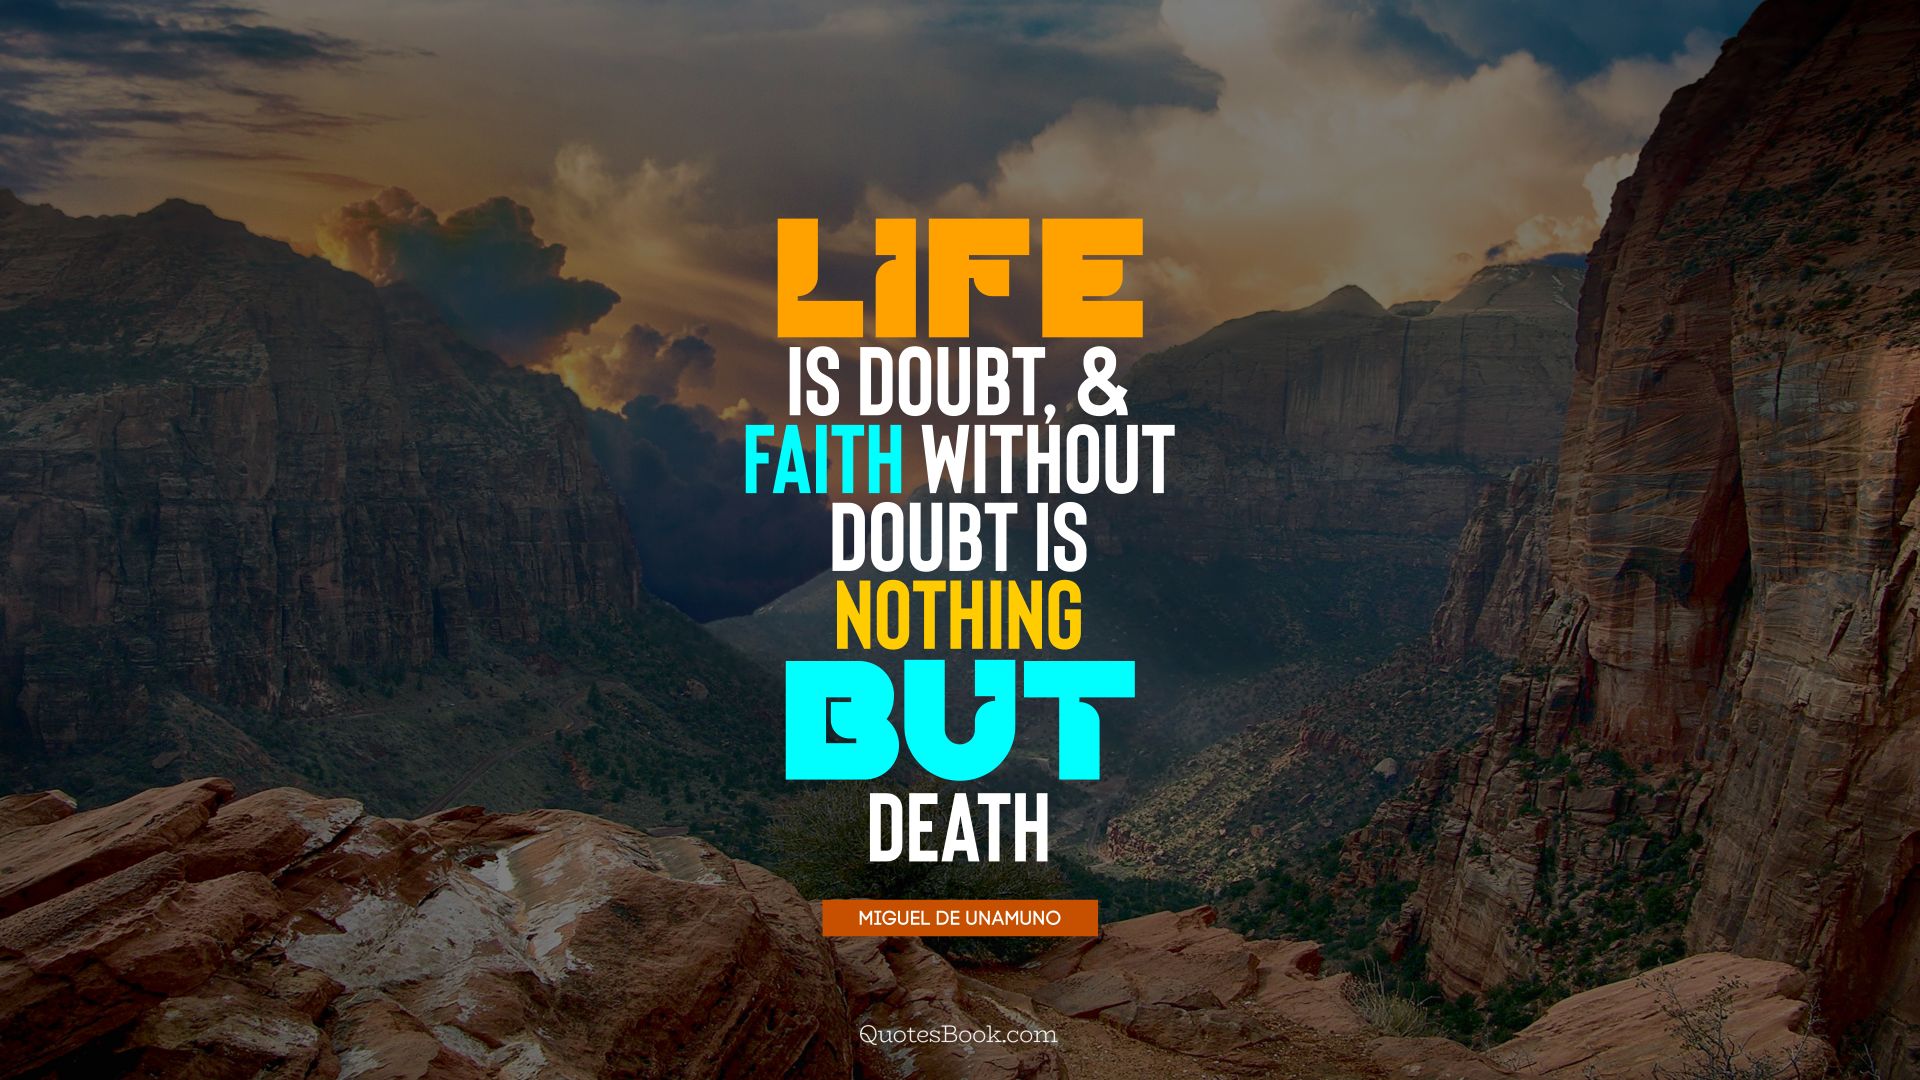 Life is doubt, and faith without doubt is nothing but death. - Quote by Miguel de Unamuno